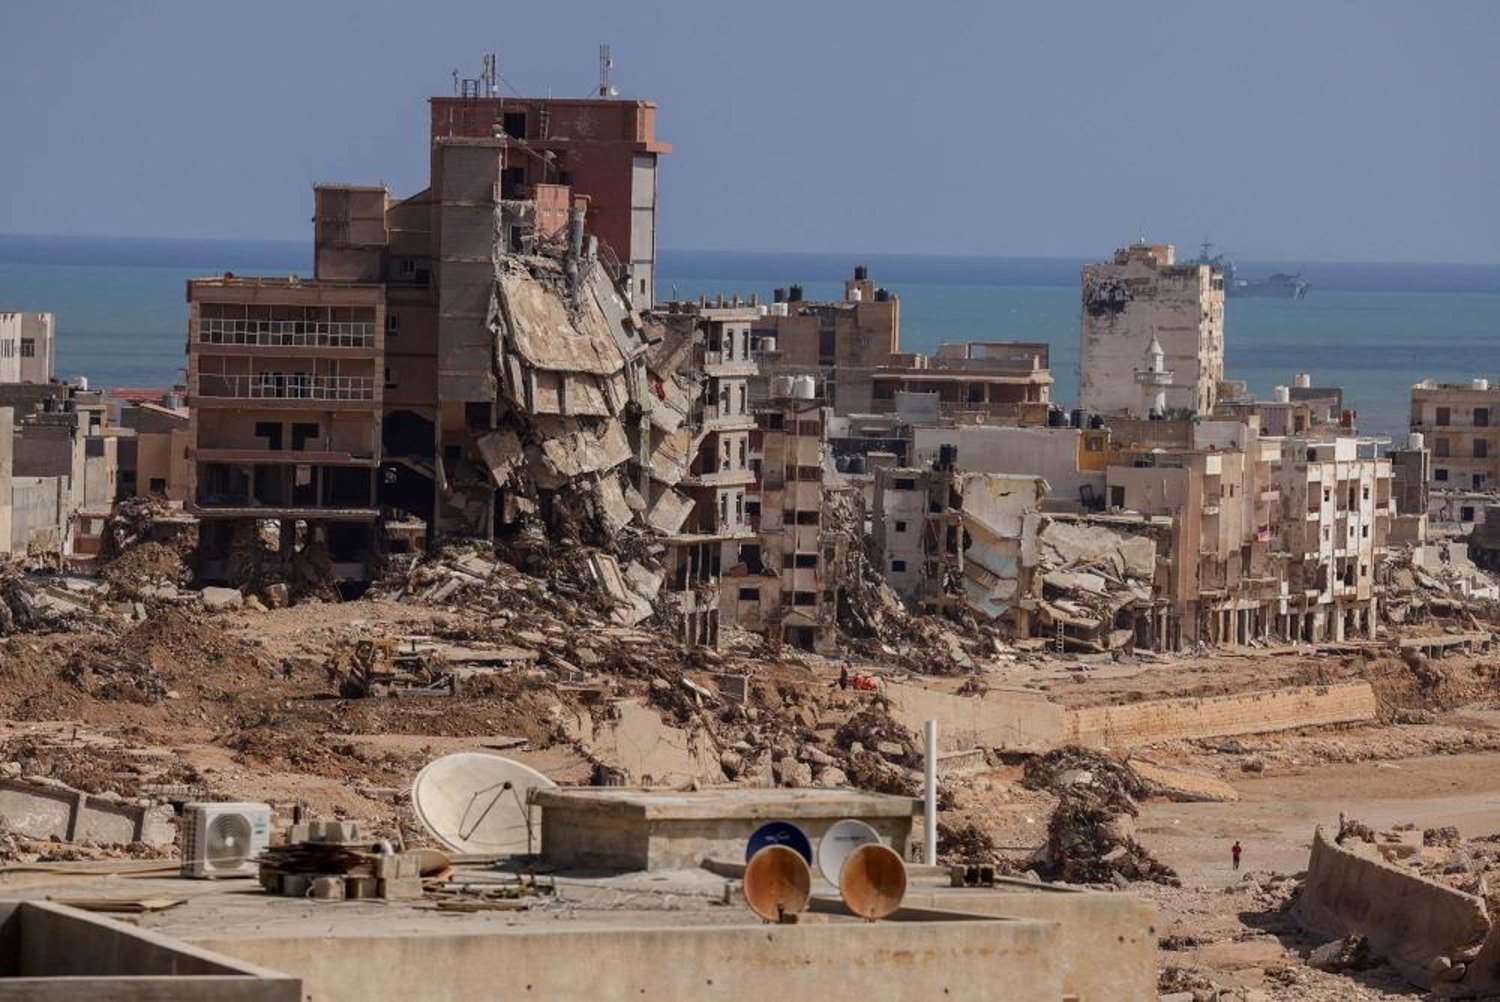  A view shows destroyed buildings in the aftermath of the the deadly storm that hit Libya, in Derna, Libya September 21, 2023. (Reuters)